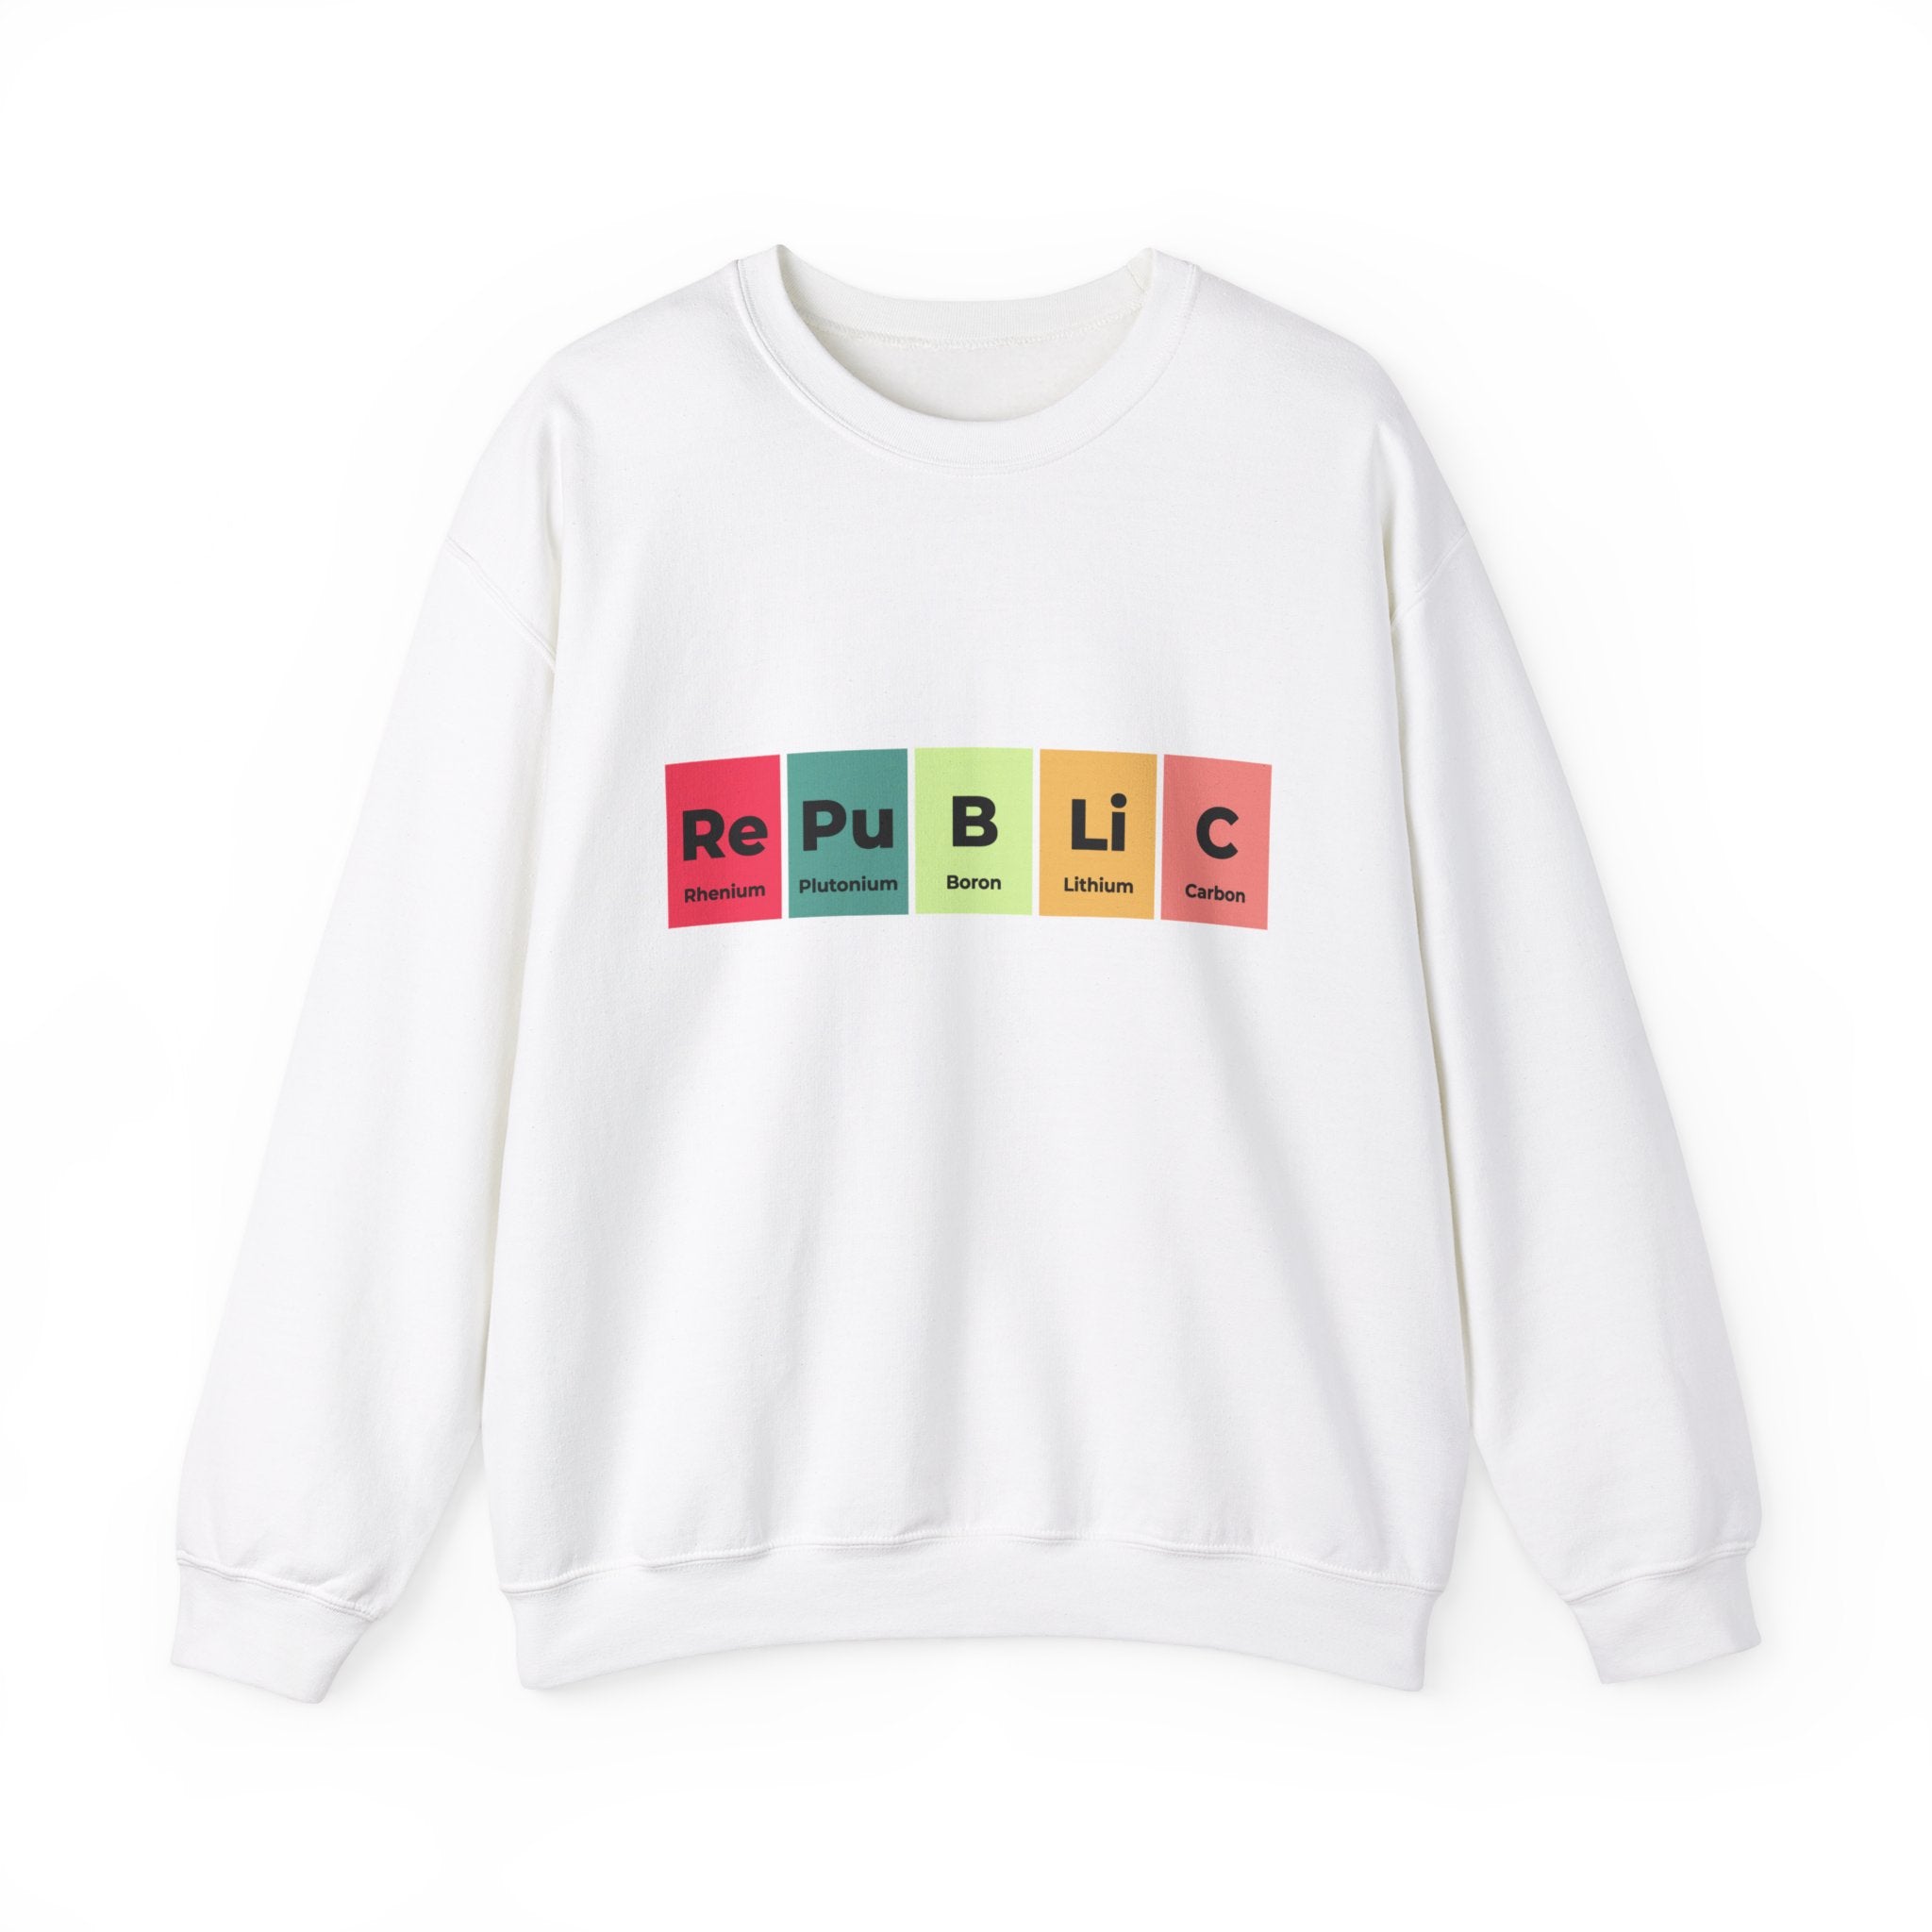 Cozy white Republic - Sweatshirt featuring text "Republic" stylized with elements from the periodic table: Rhenium, Plutonium, Barium, Lithium, and Carbon, each in a different color box—perfect for winter wear.